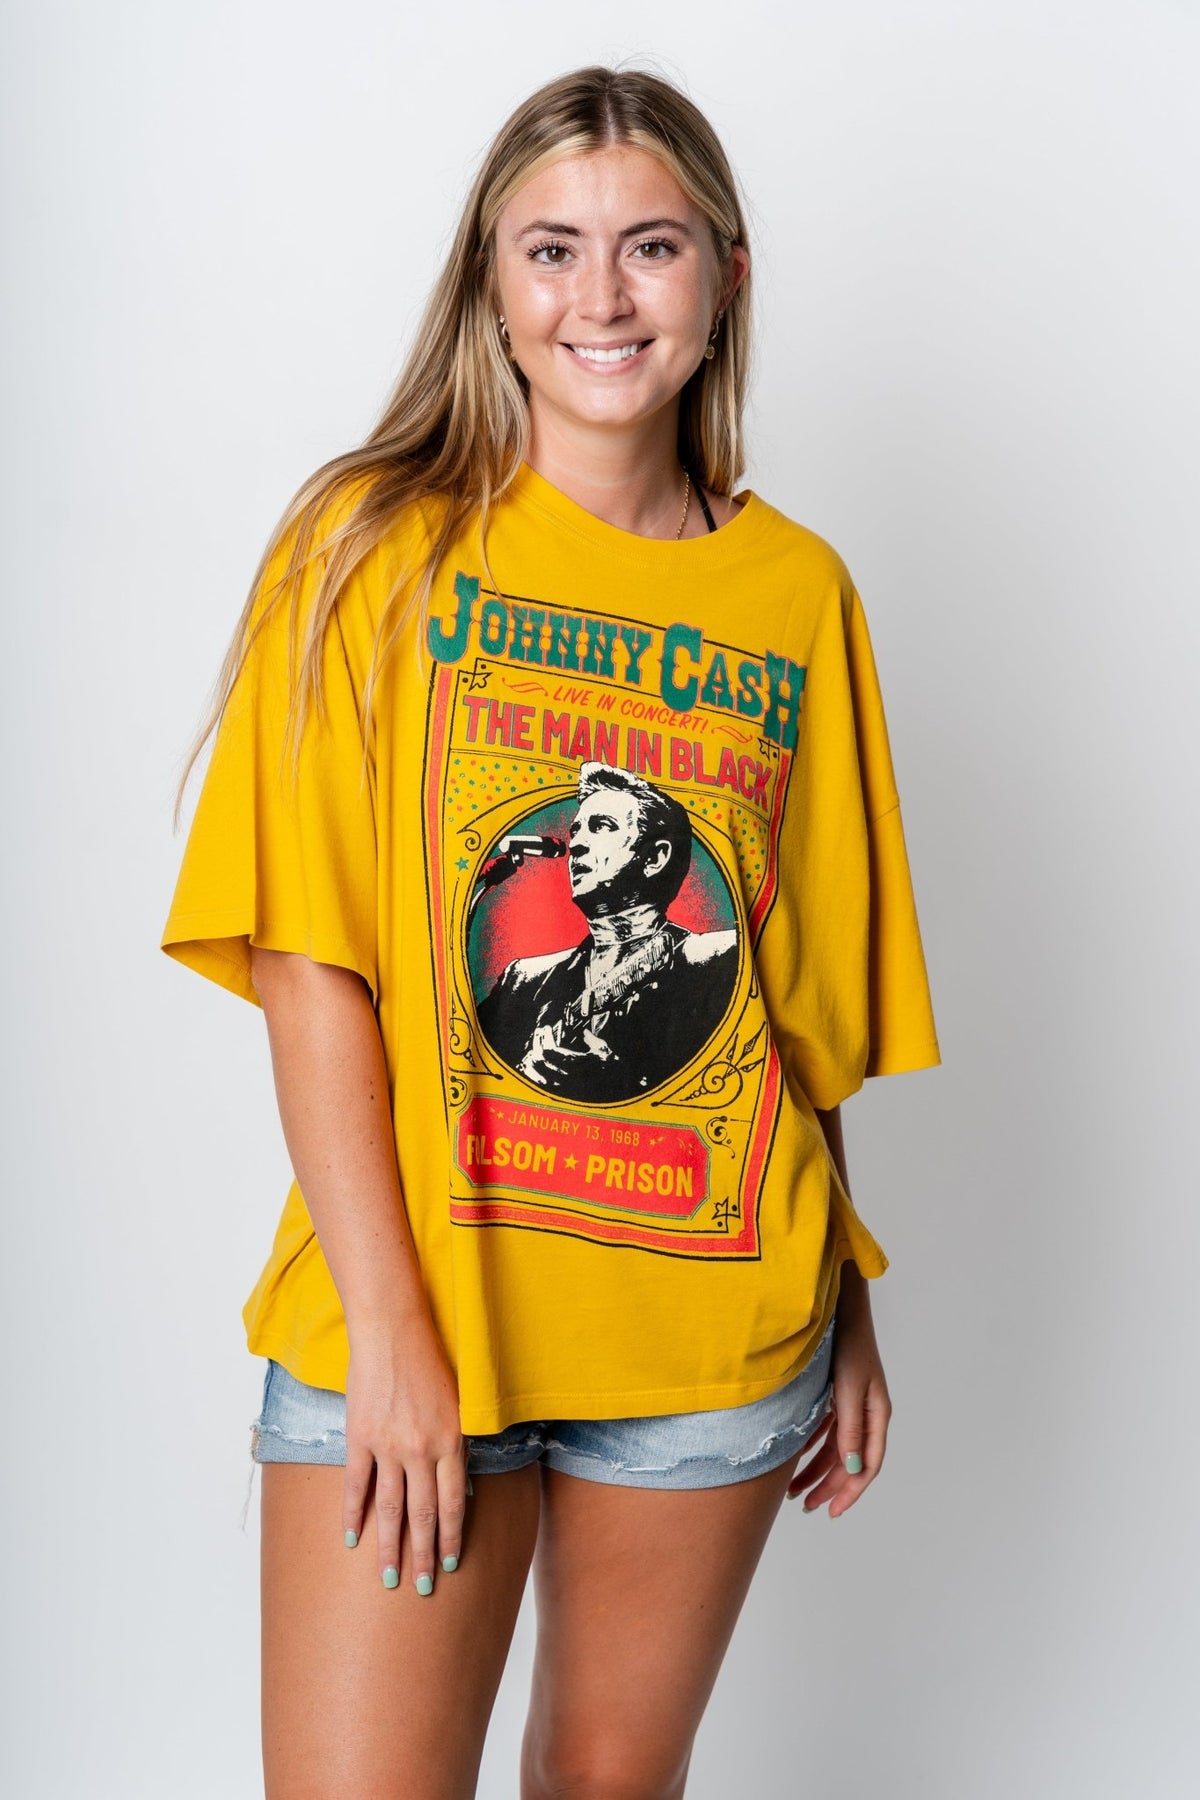 DayDreamer Johnny Cash man in black oversized tee golden daze - Trendy Band T-Shirts and Sweatshirts at Lush Fashion Lounge Boutique in Oklahoma City